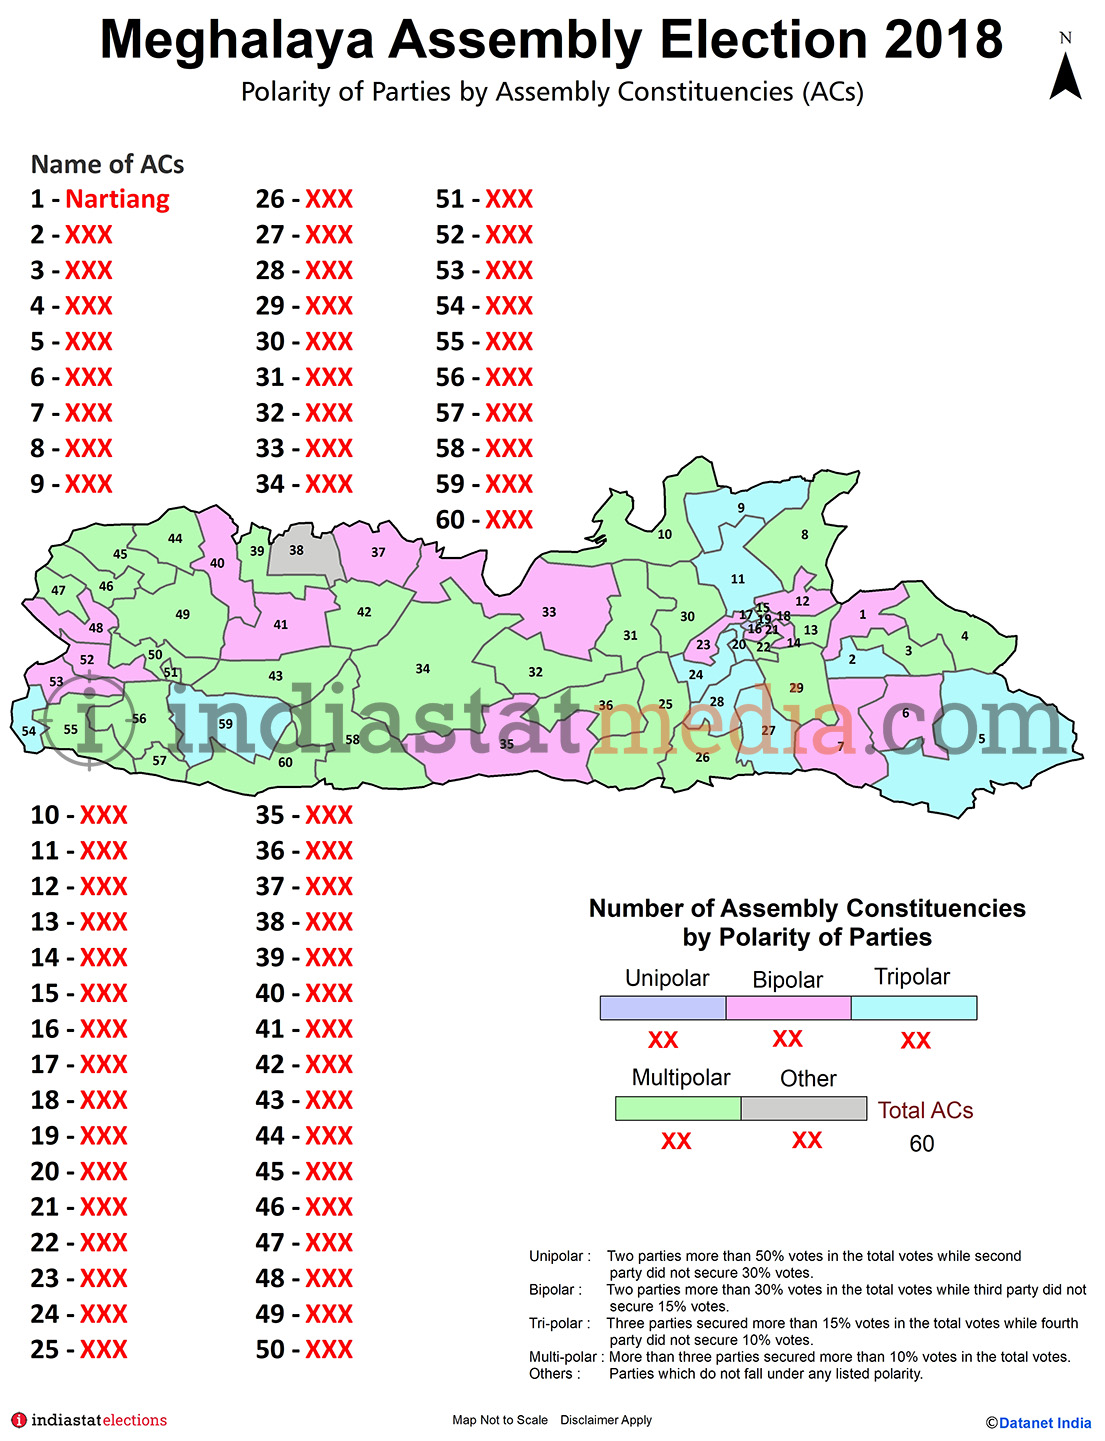 Polarity of Parties by Assembly Constituencies in Meghalaya (Assembly Election - 2018)